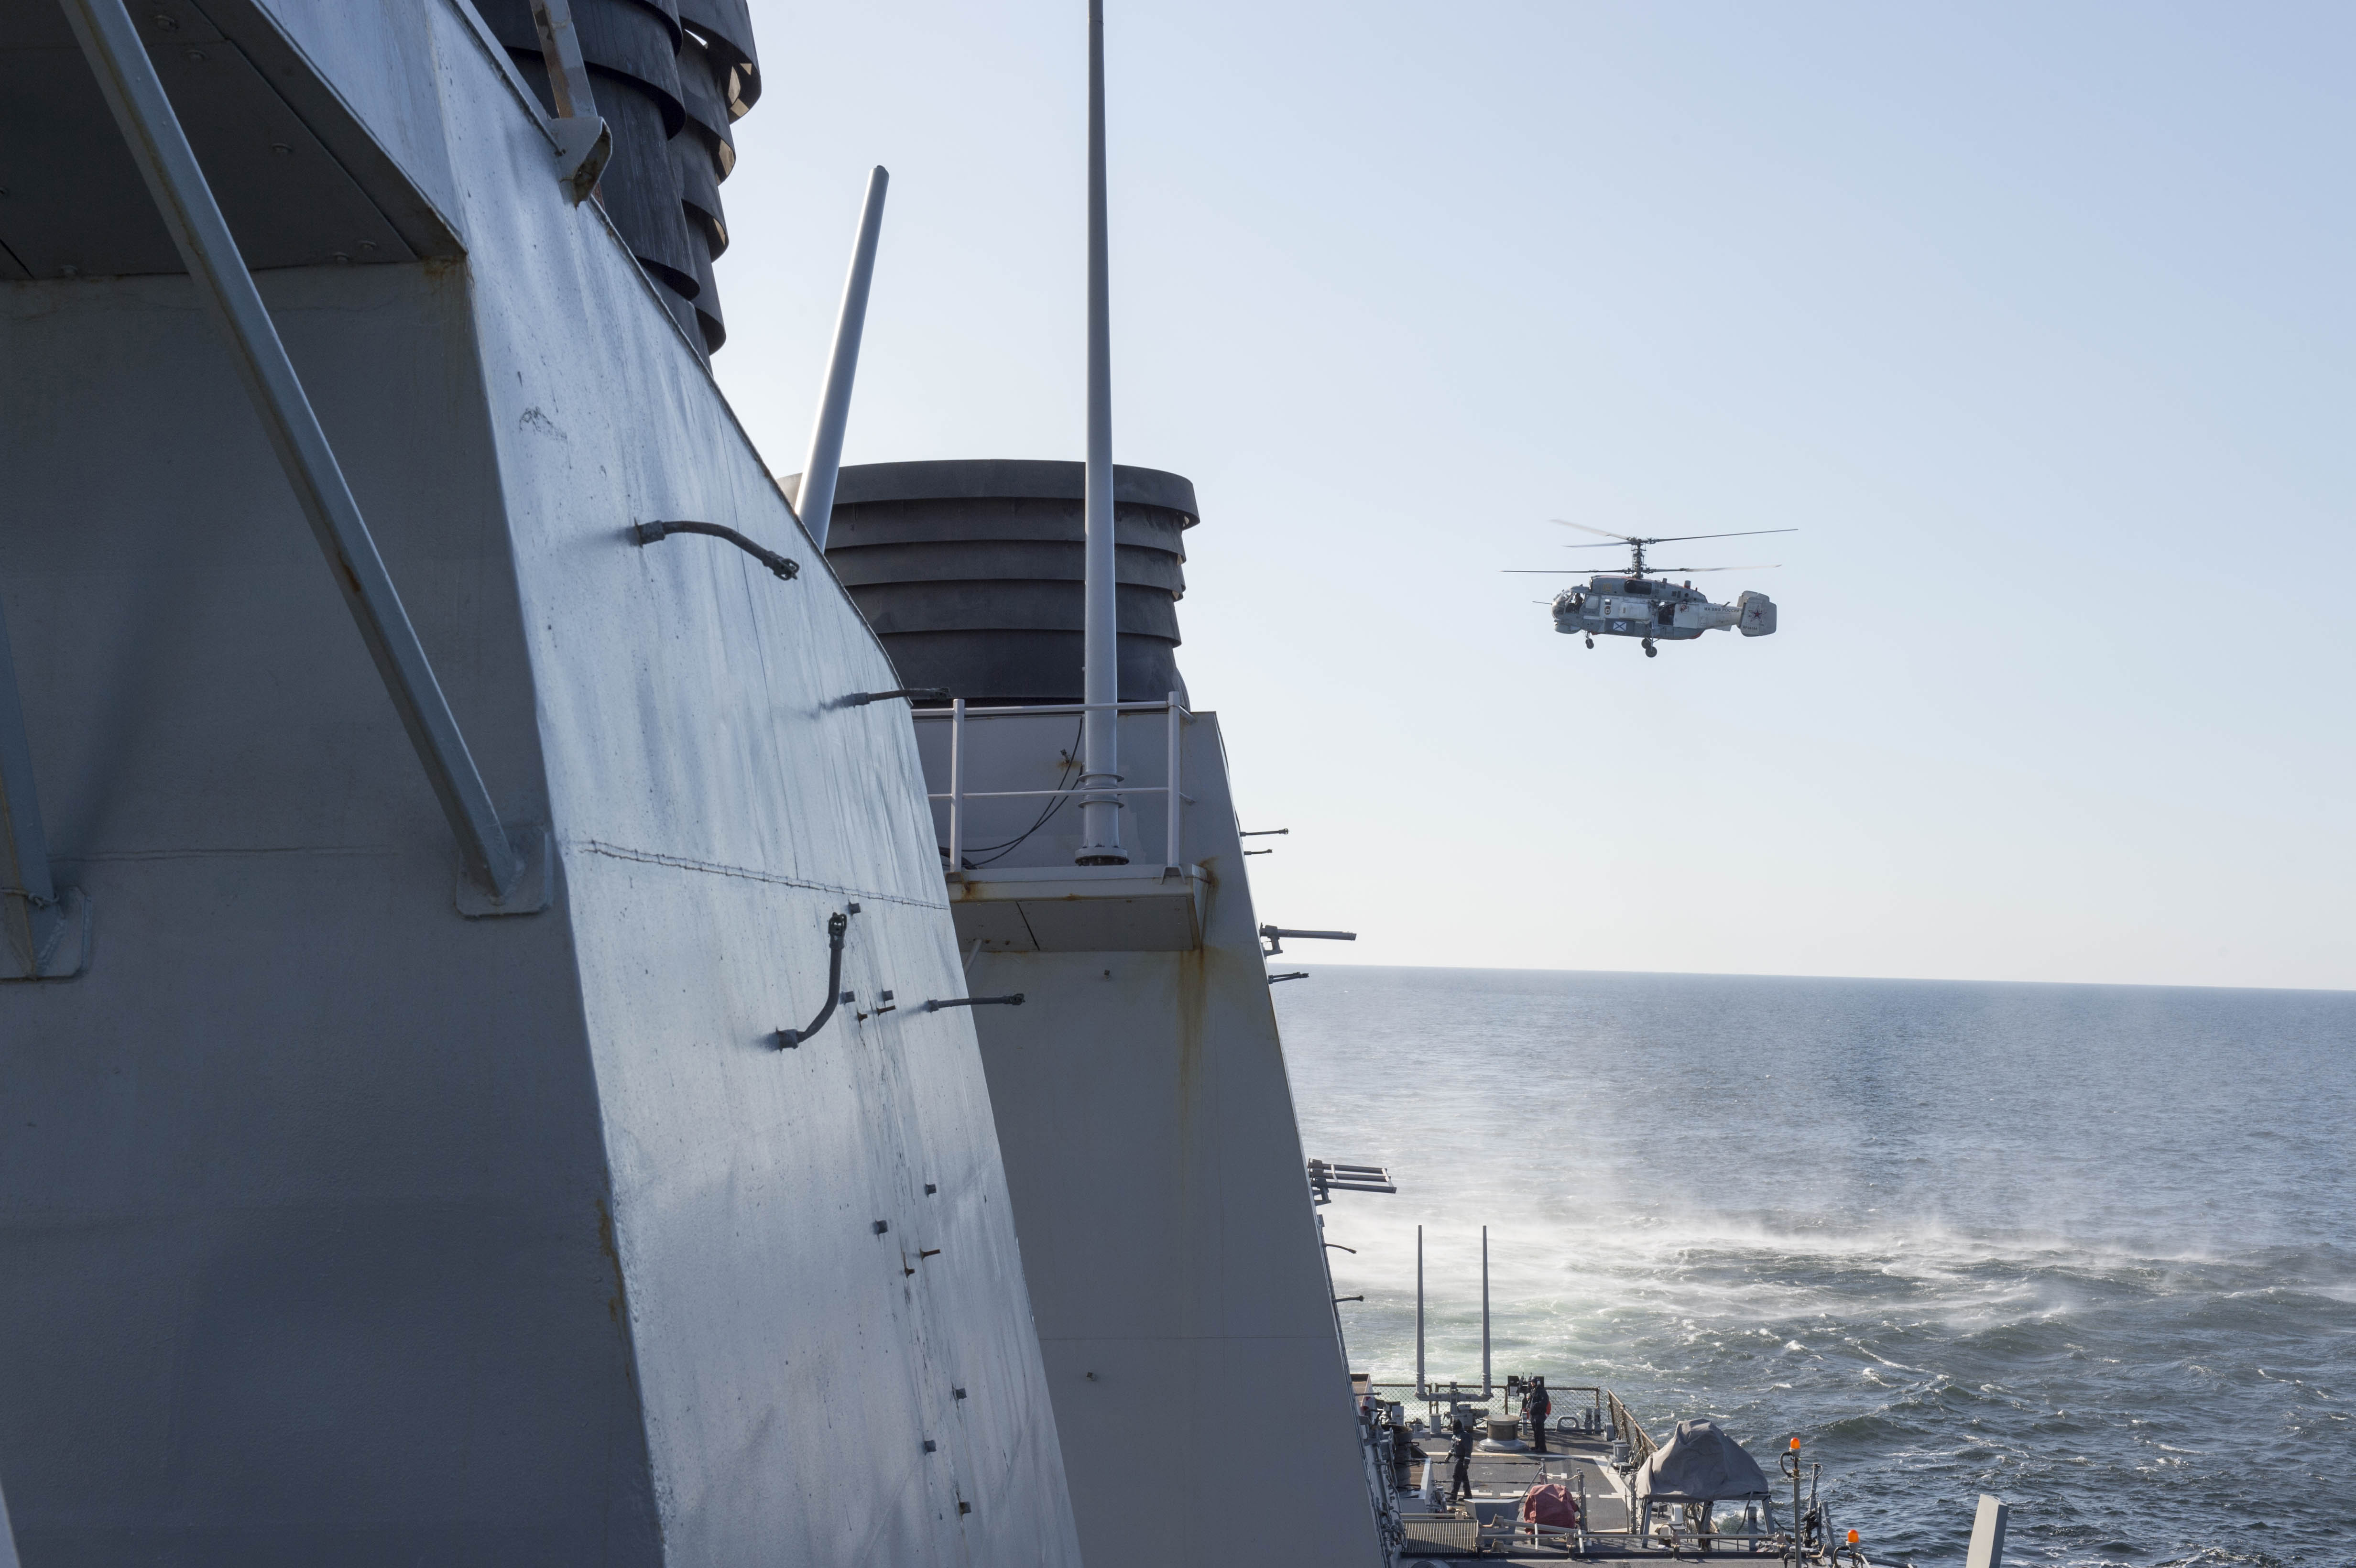 A Russian Kamov KA-27 HELIX flies low-level passes near the Arleigh Burke-class guided missile destroyer USS Donald Cook (DDG-75) on April 12, 2016. US Navy Photo